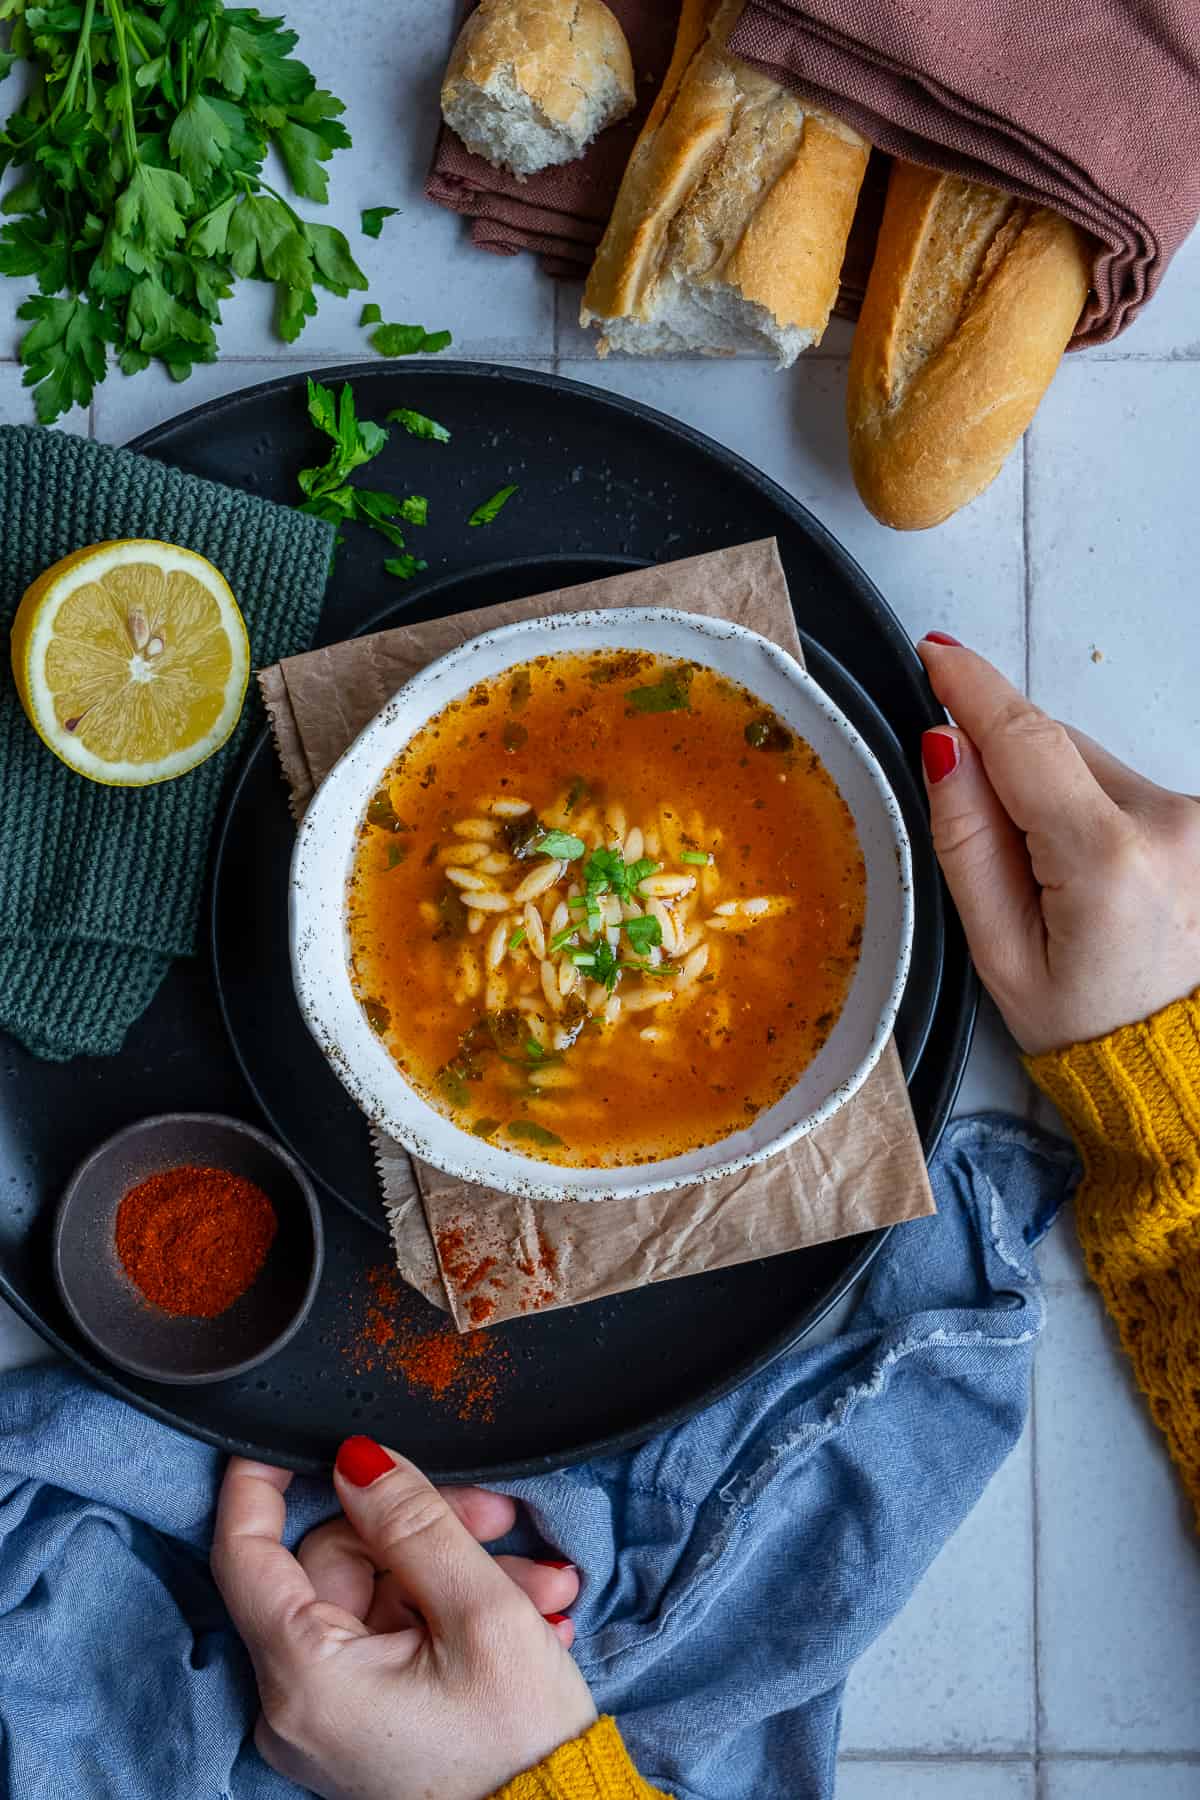 Woman hands holding a black colored plate, a bowl of orzo soup, a mini bowl of paprika and half of a lemon on it, some bread and parsley on the side.